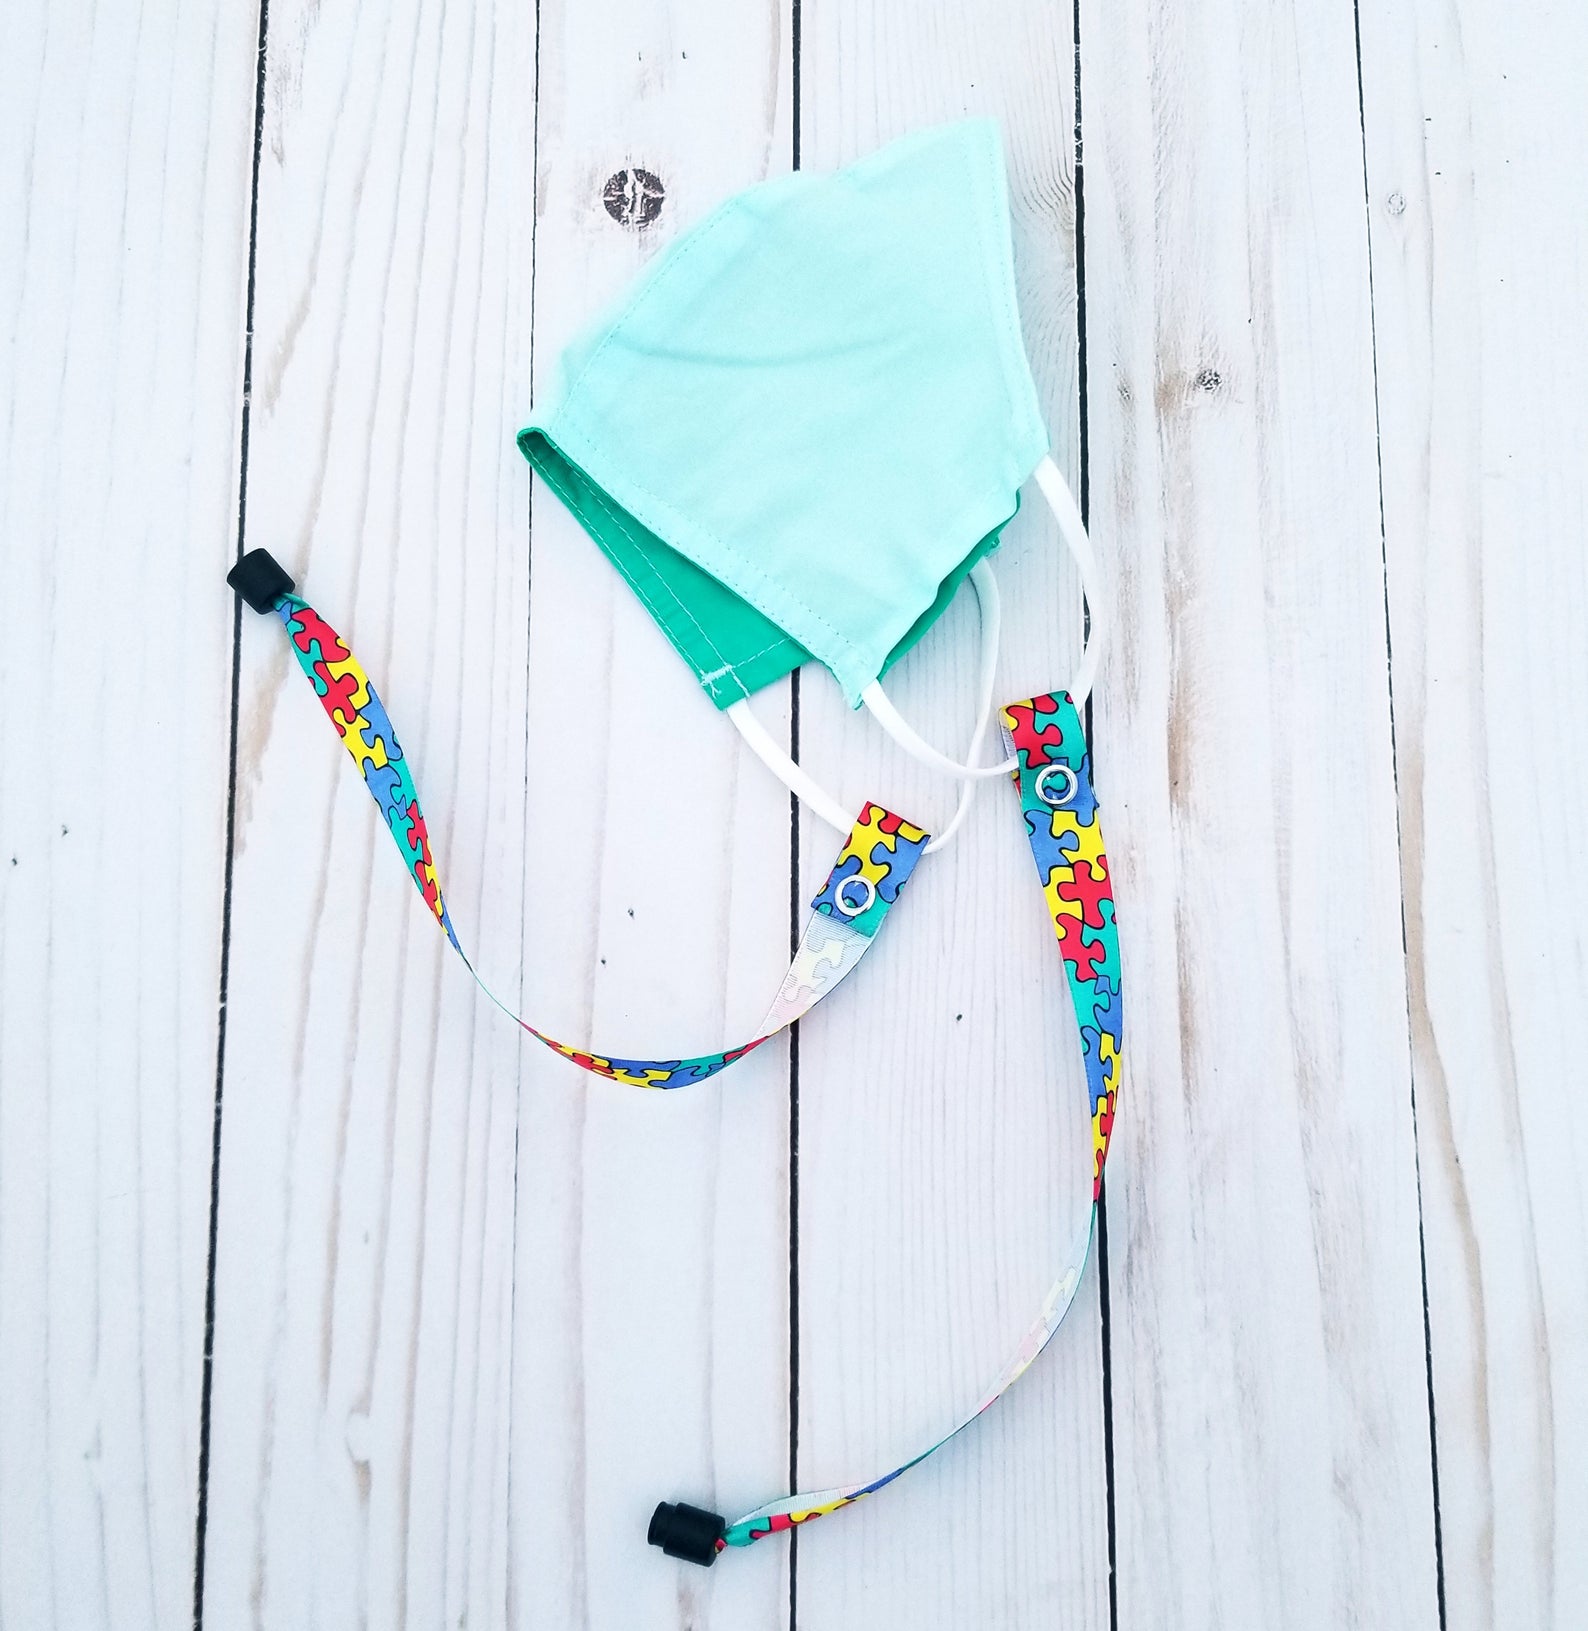 Cool mask accessories for kids: A breakaway lanyard that's just a little safer for young kids